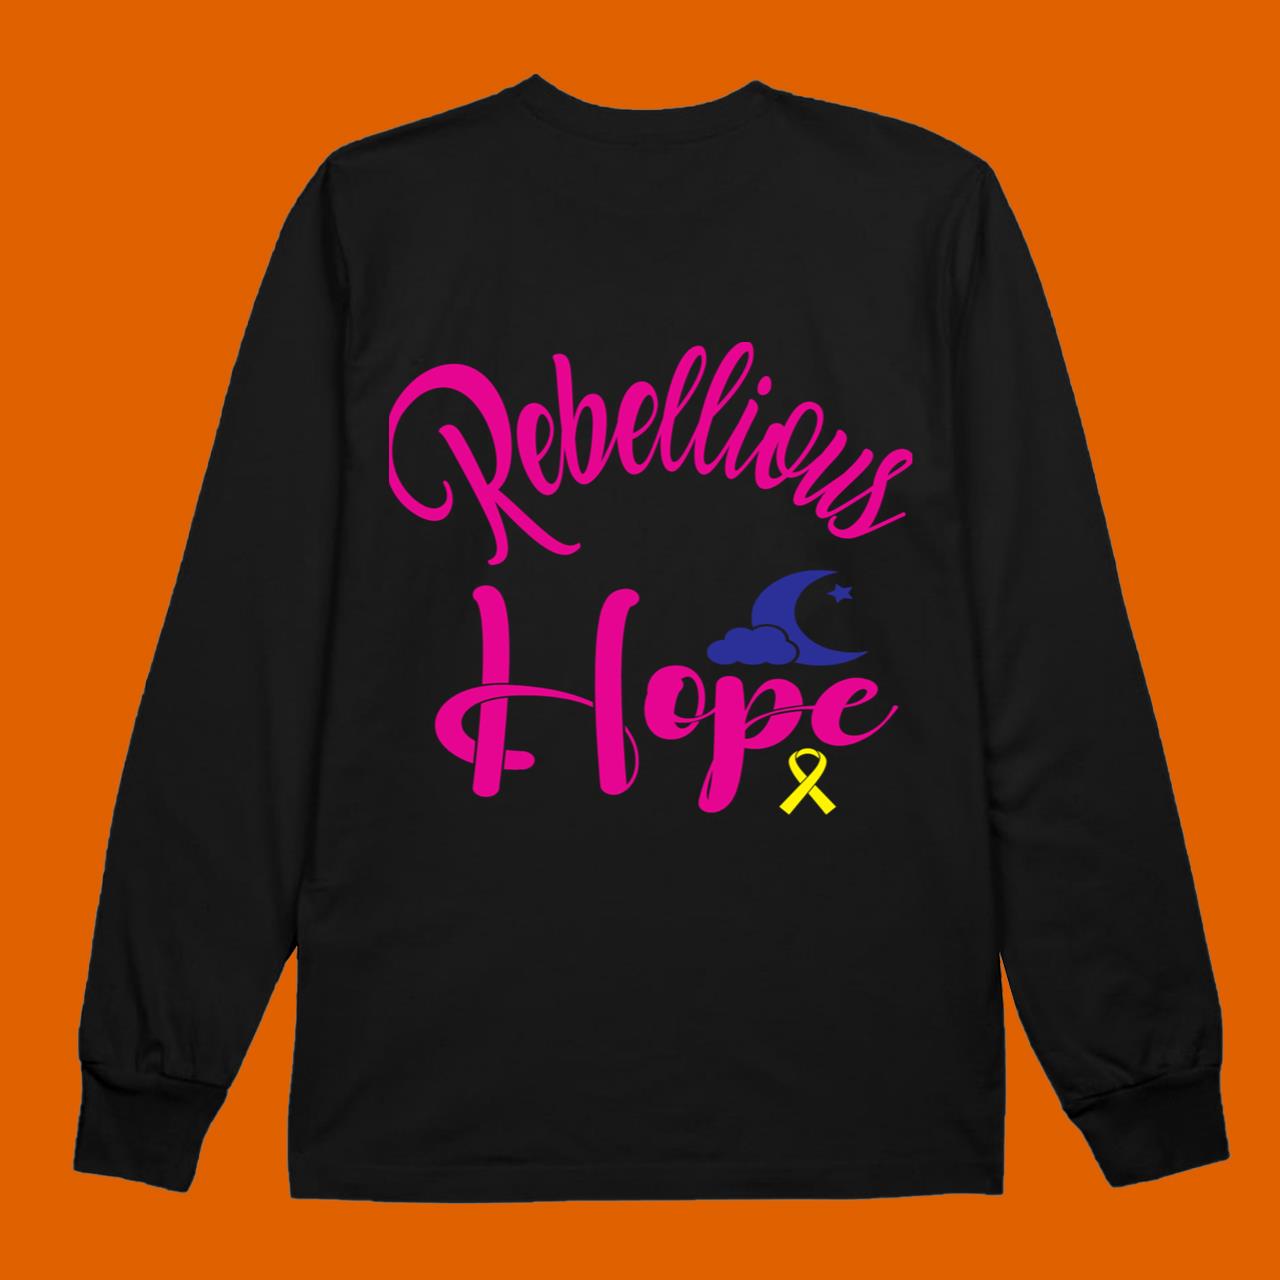 Rebellious Hope – Bowel Babe Relaxed Fit T-Shirt